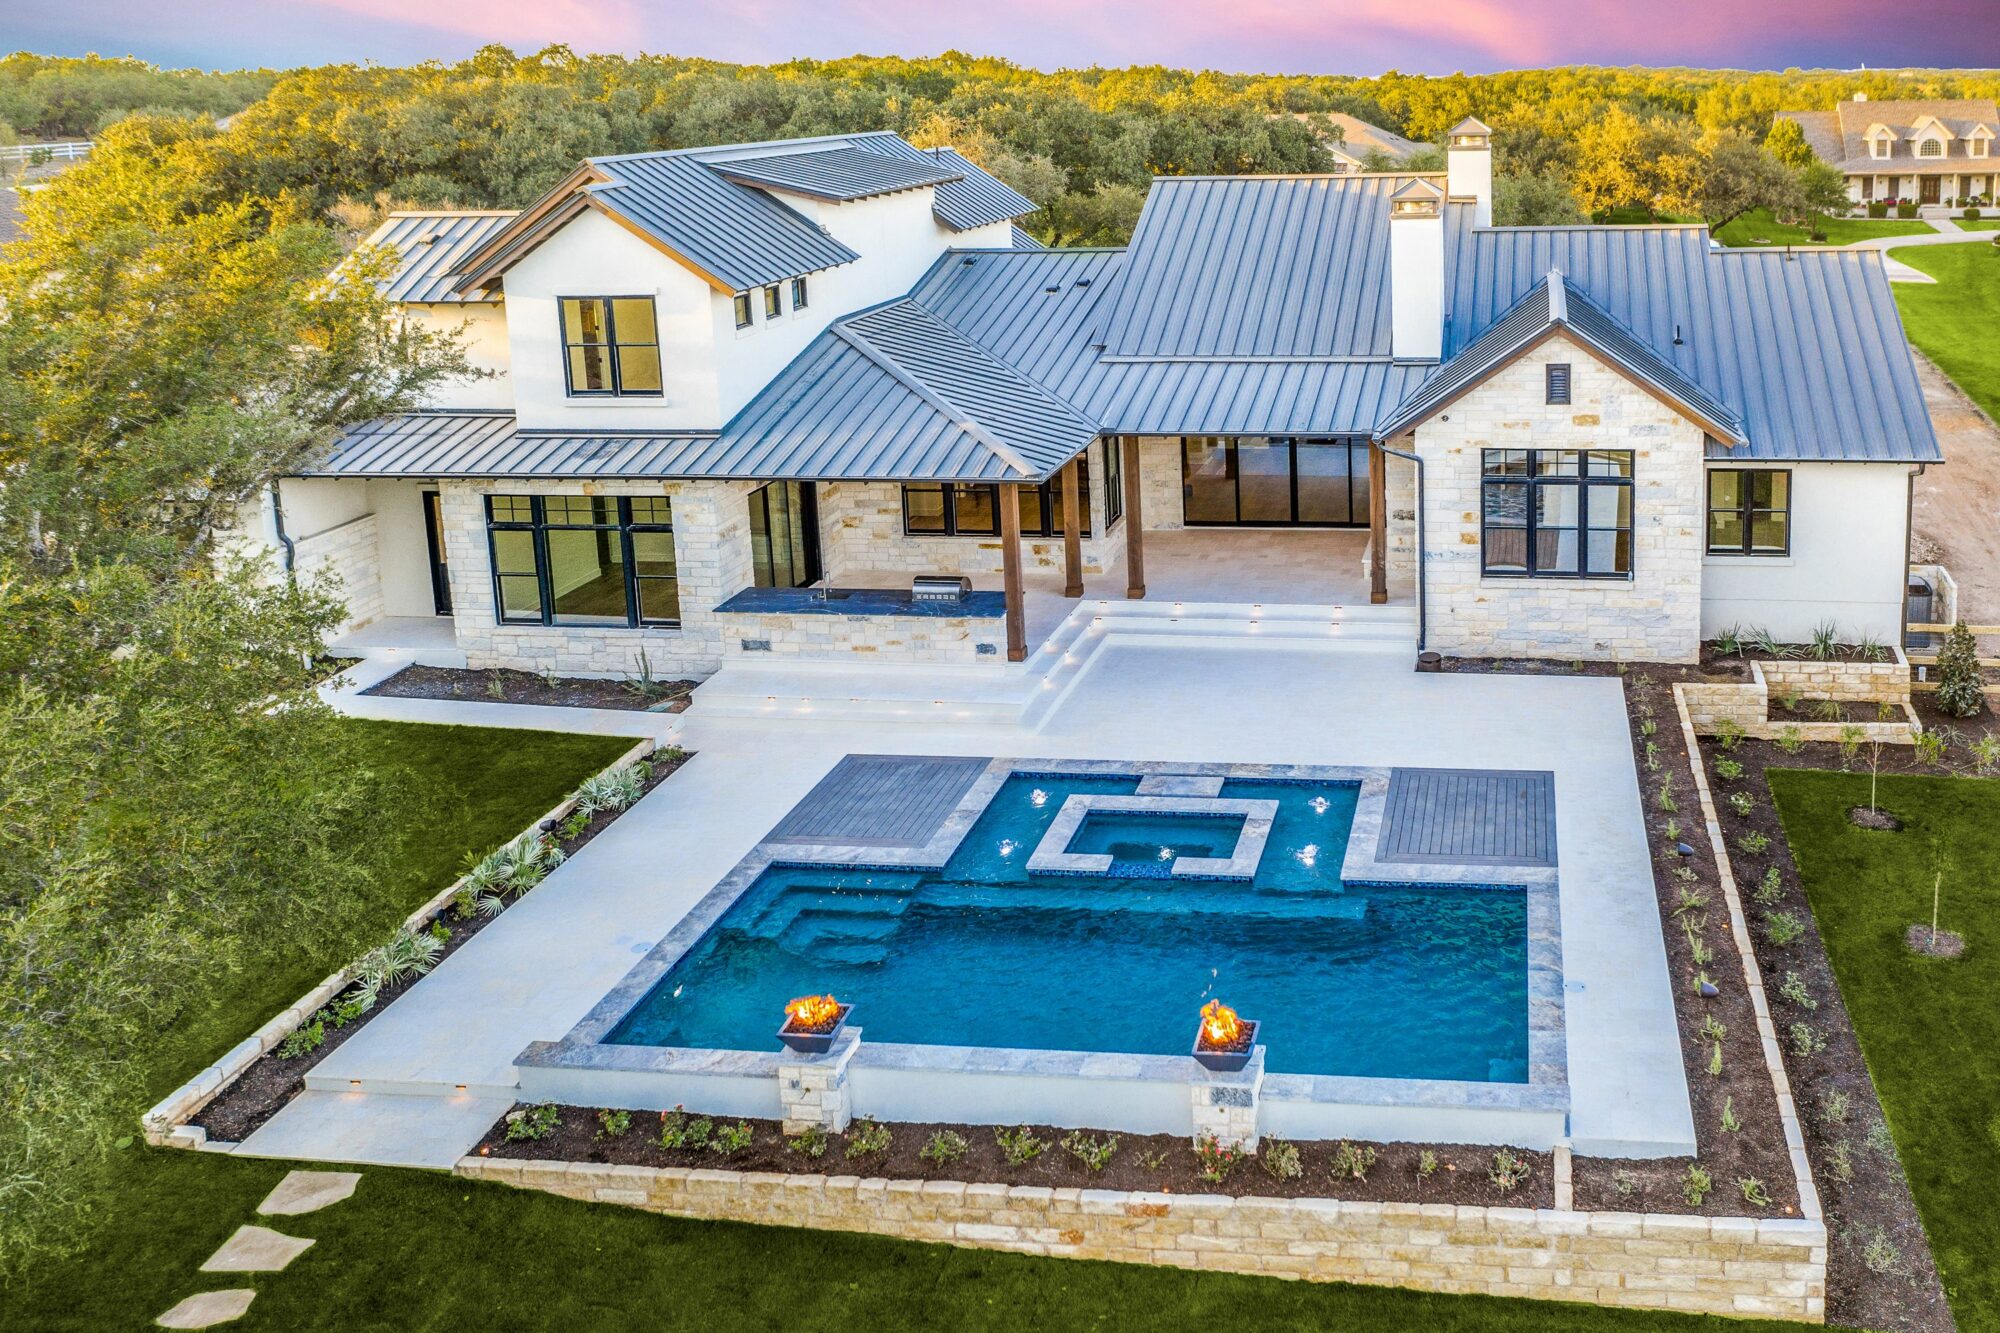 Aerial shot of home with pool in backyard